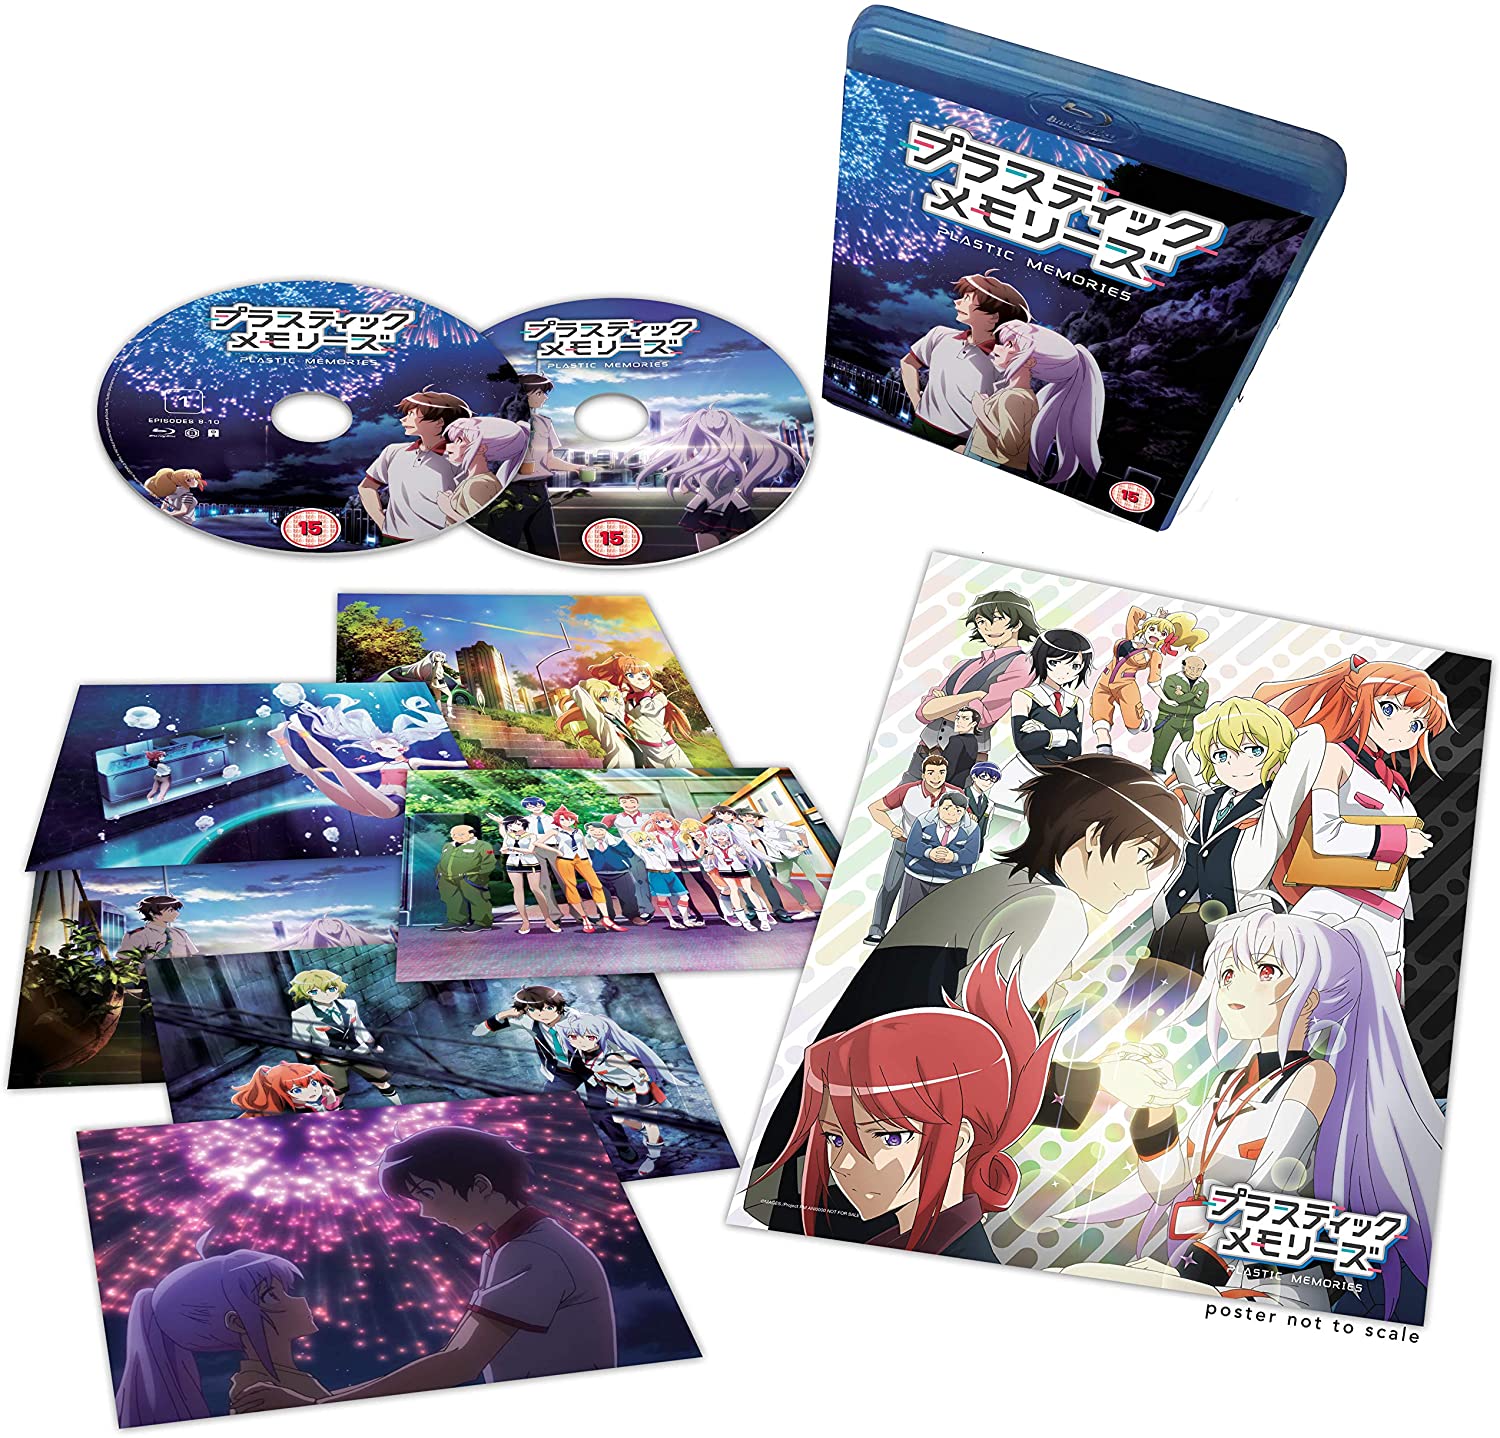 Plastic Memories: Part 2 - Blu-ray Collector's Edition